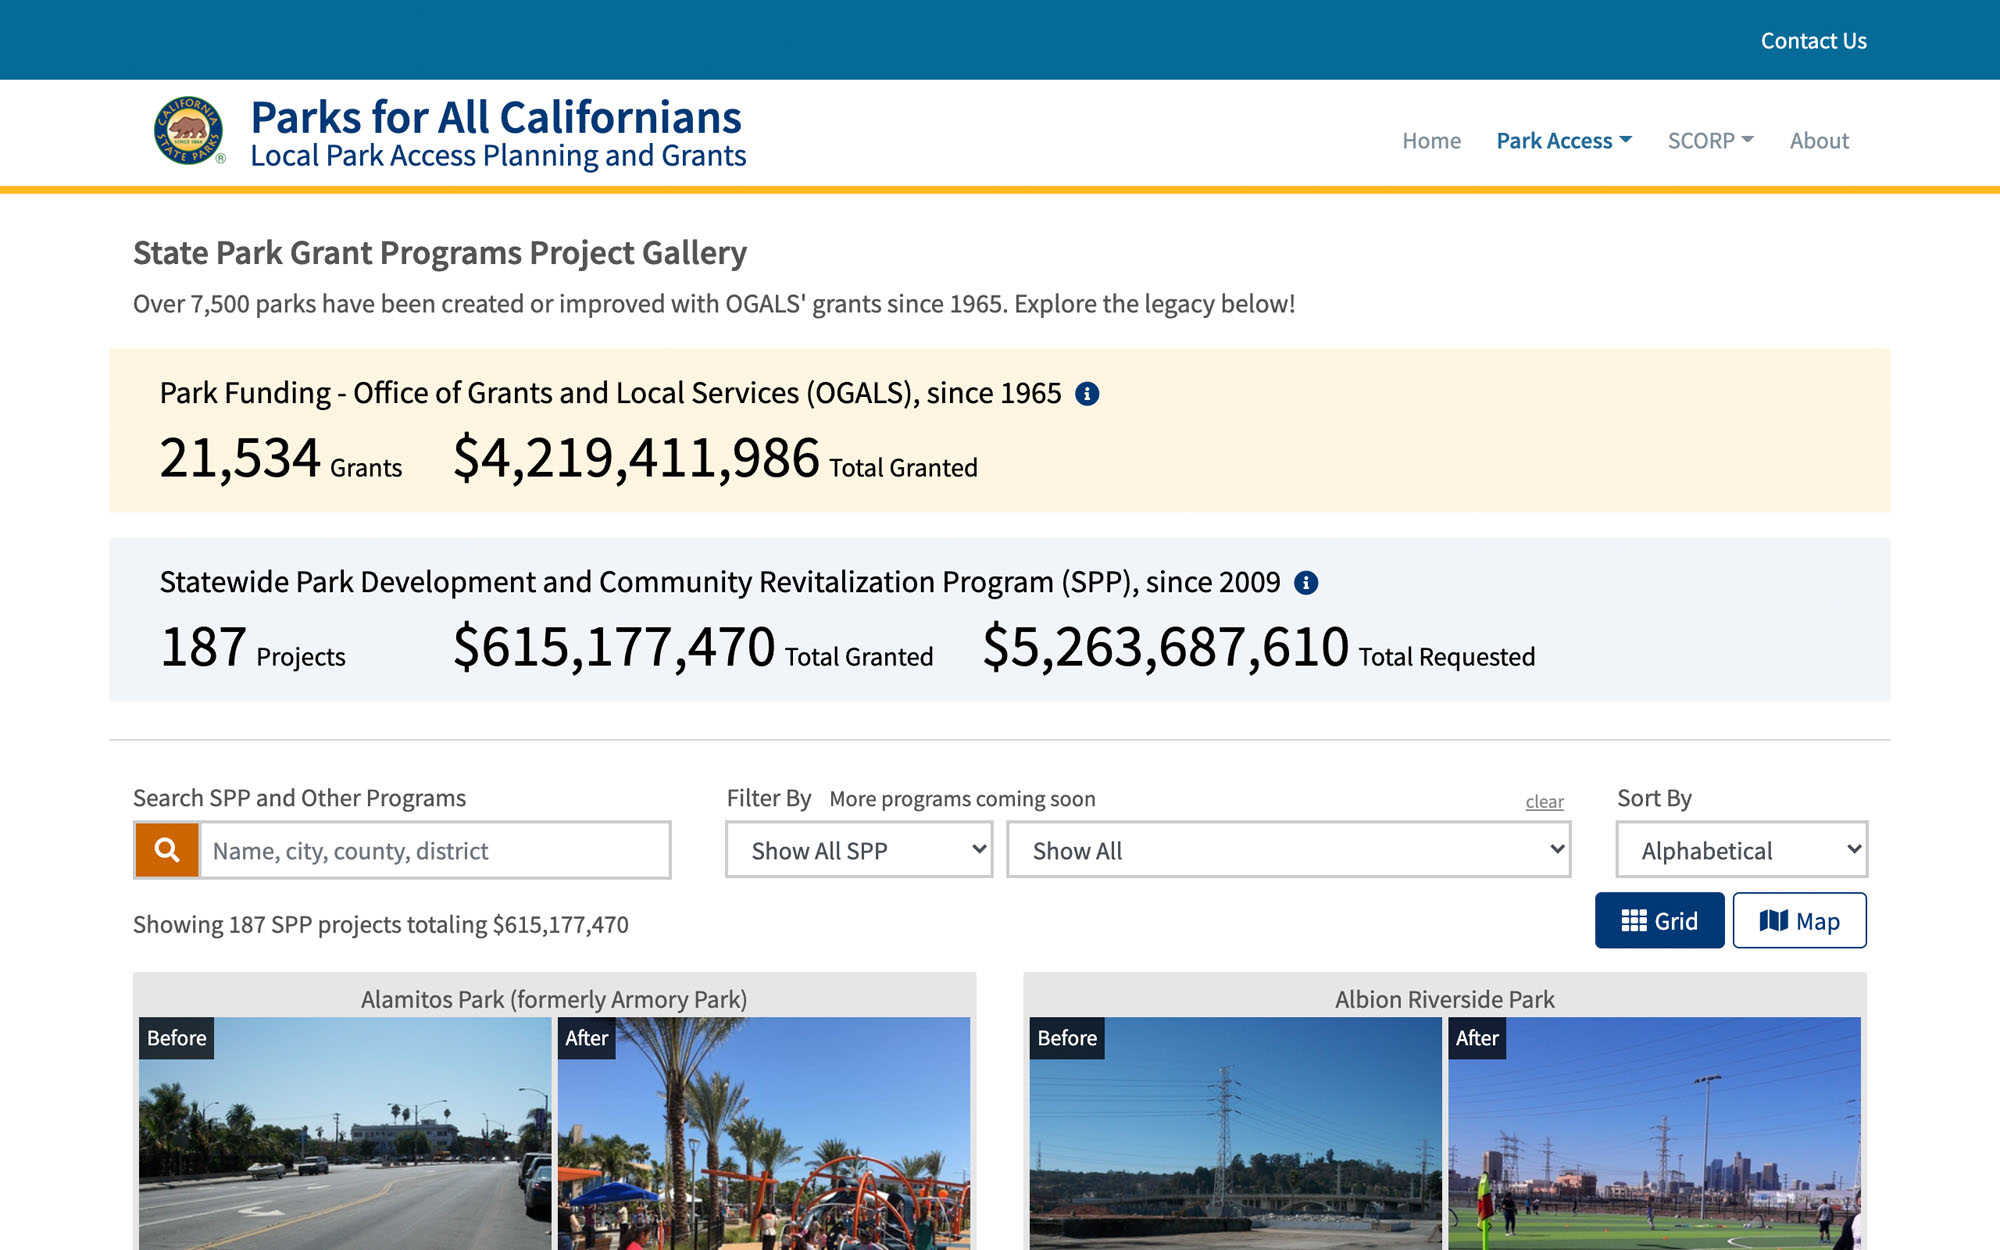 The Parks for All Californians Project Gallery has keyword search and shows the value of all grants